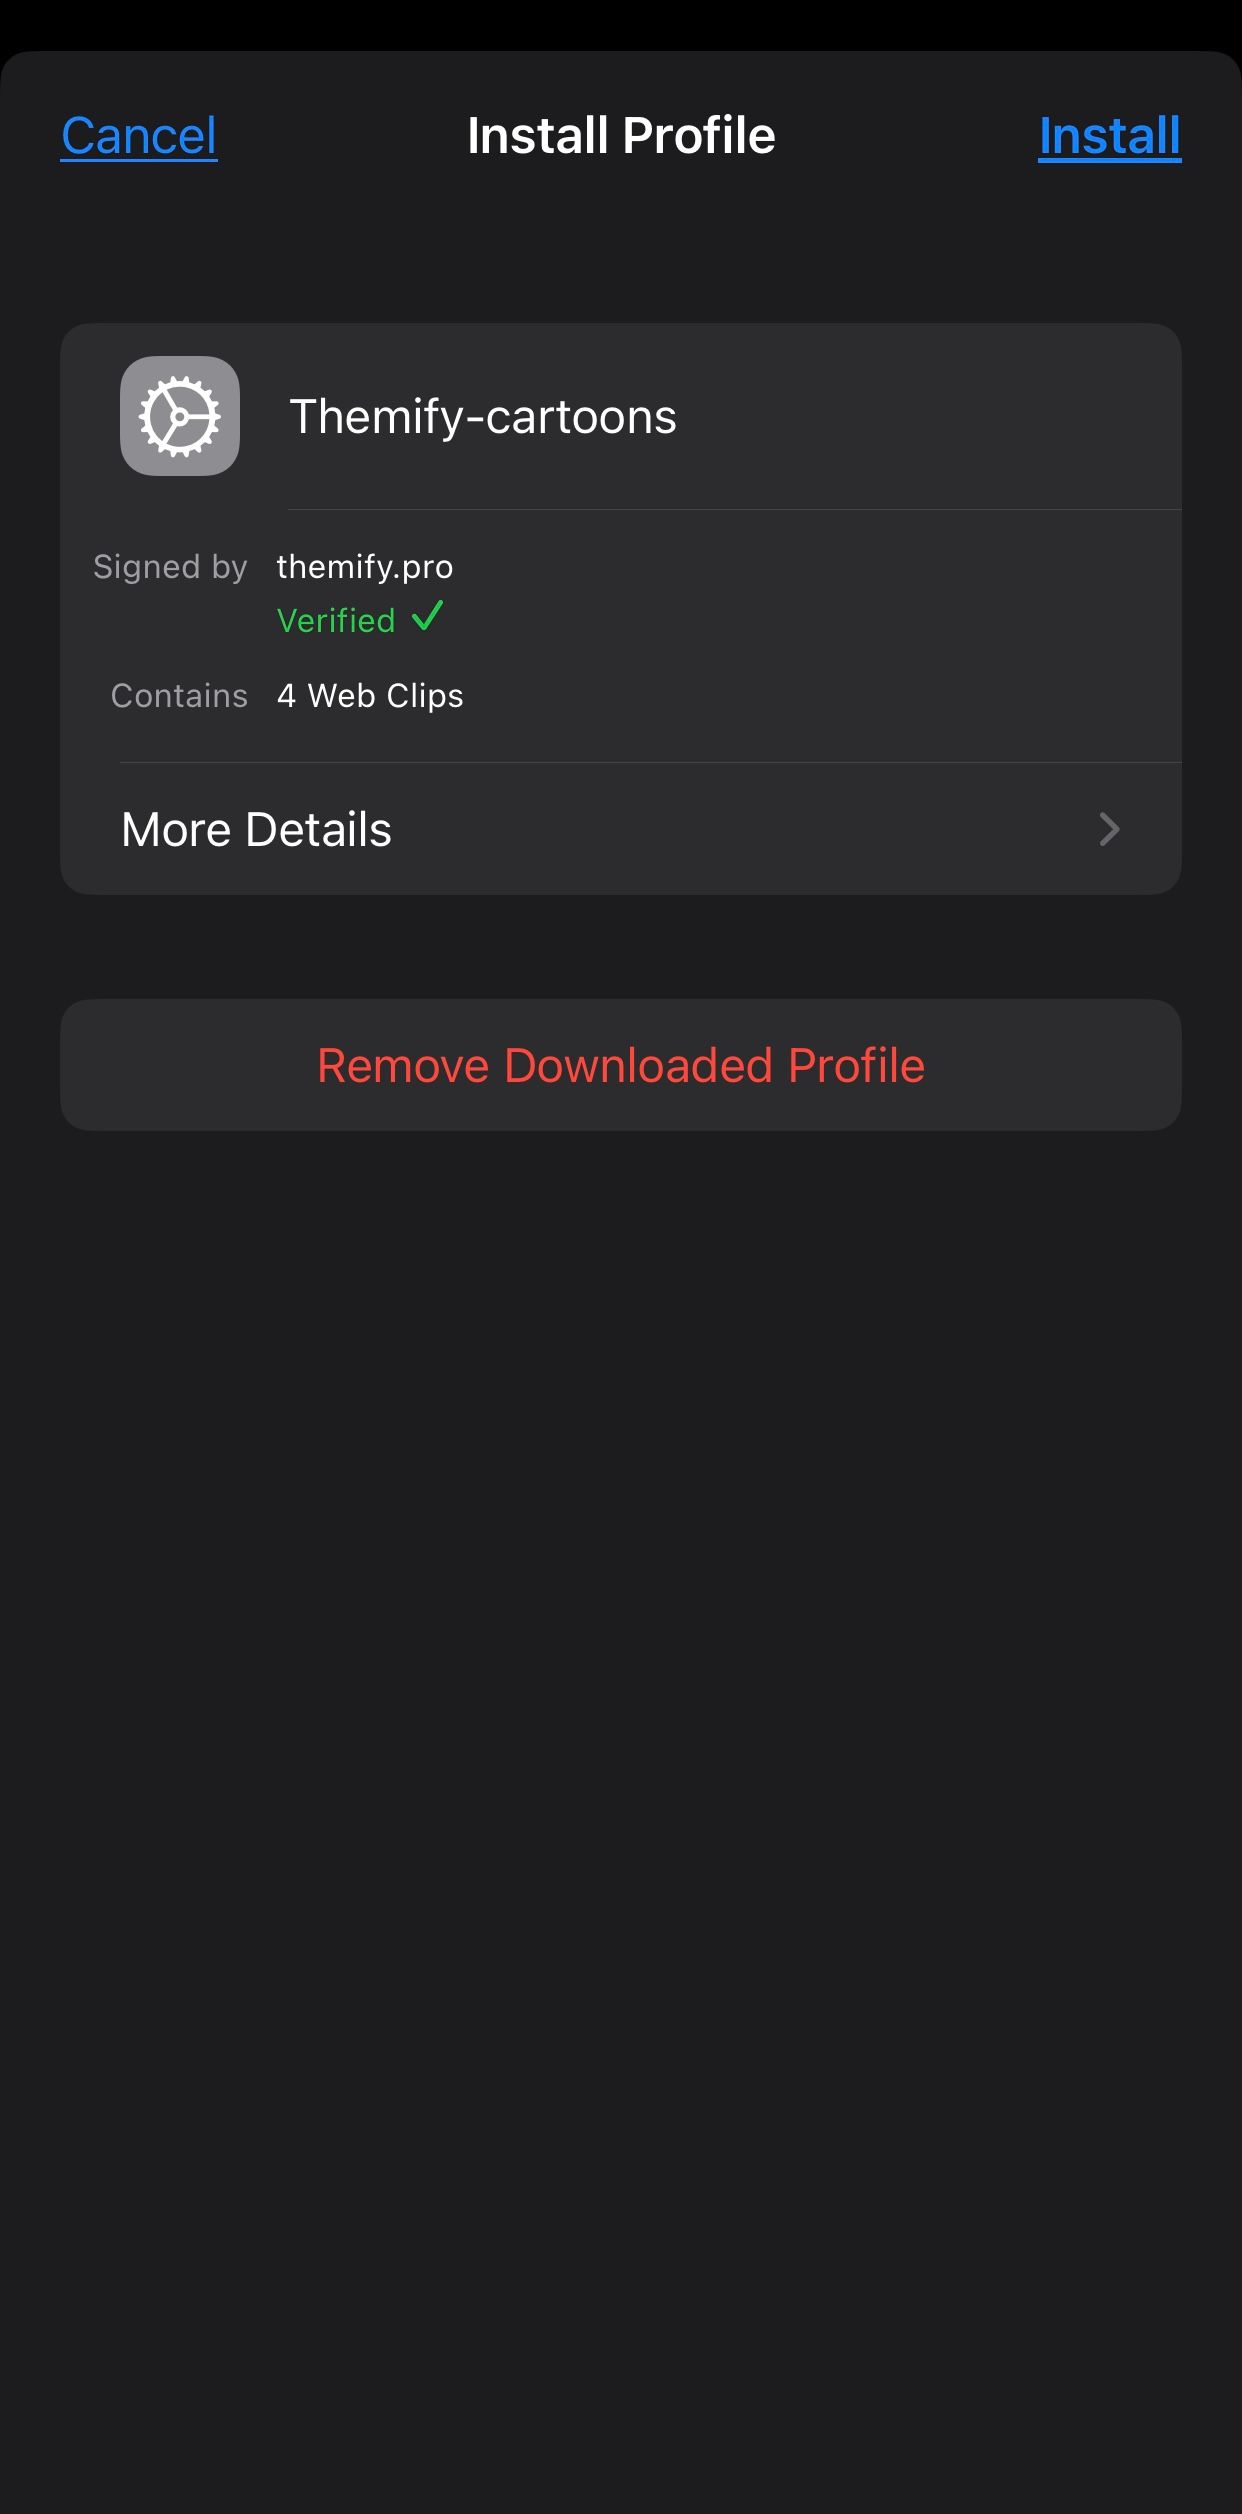 iPhone settings to install profile of downloaded Themify icons